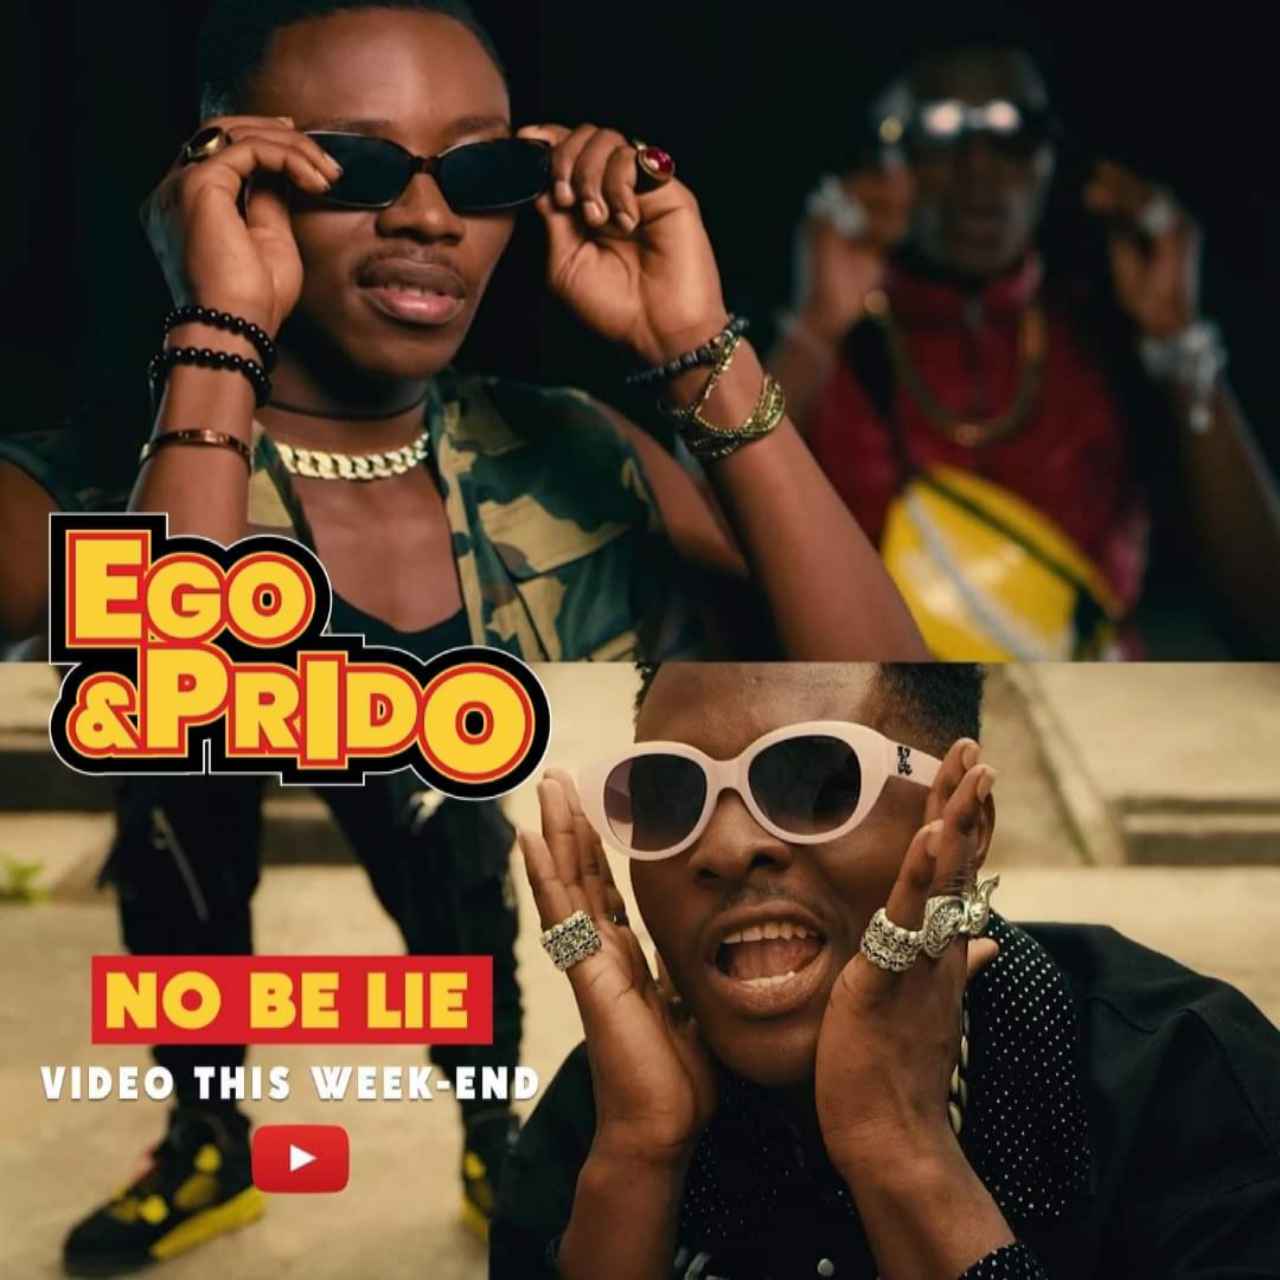 Download No be lie by Ego and Prido (Video & MP3)